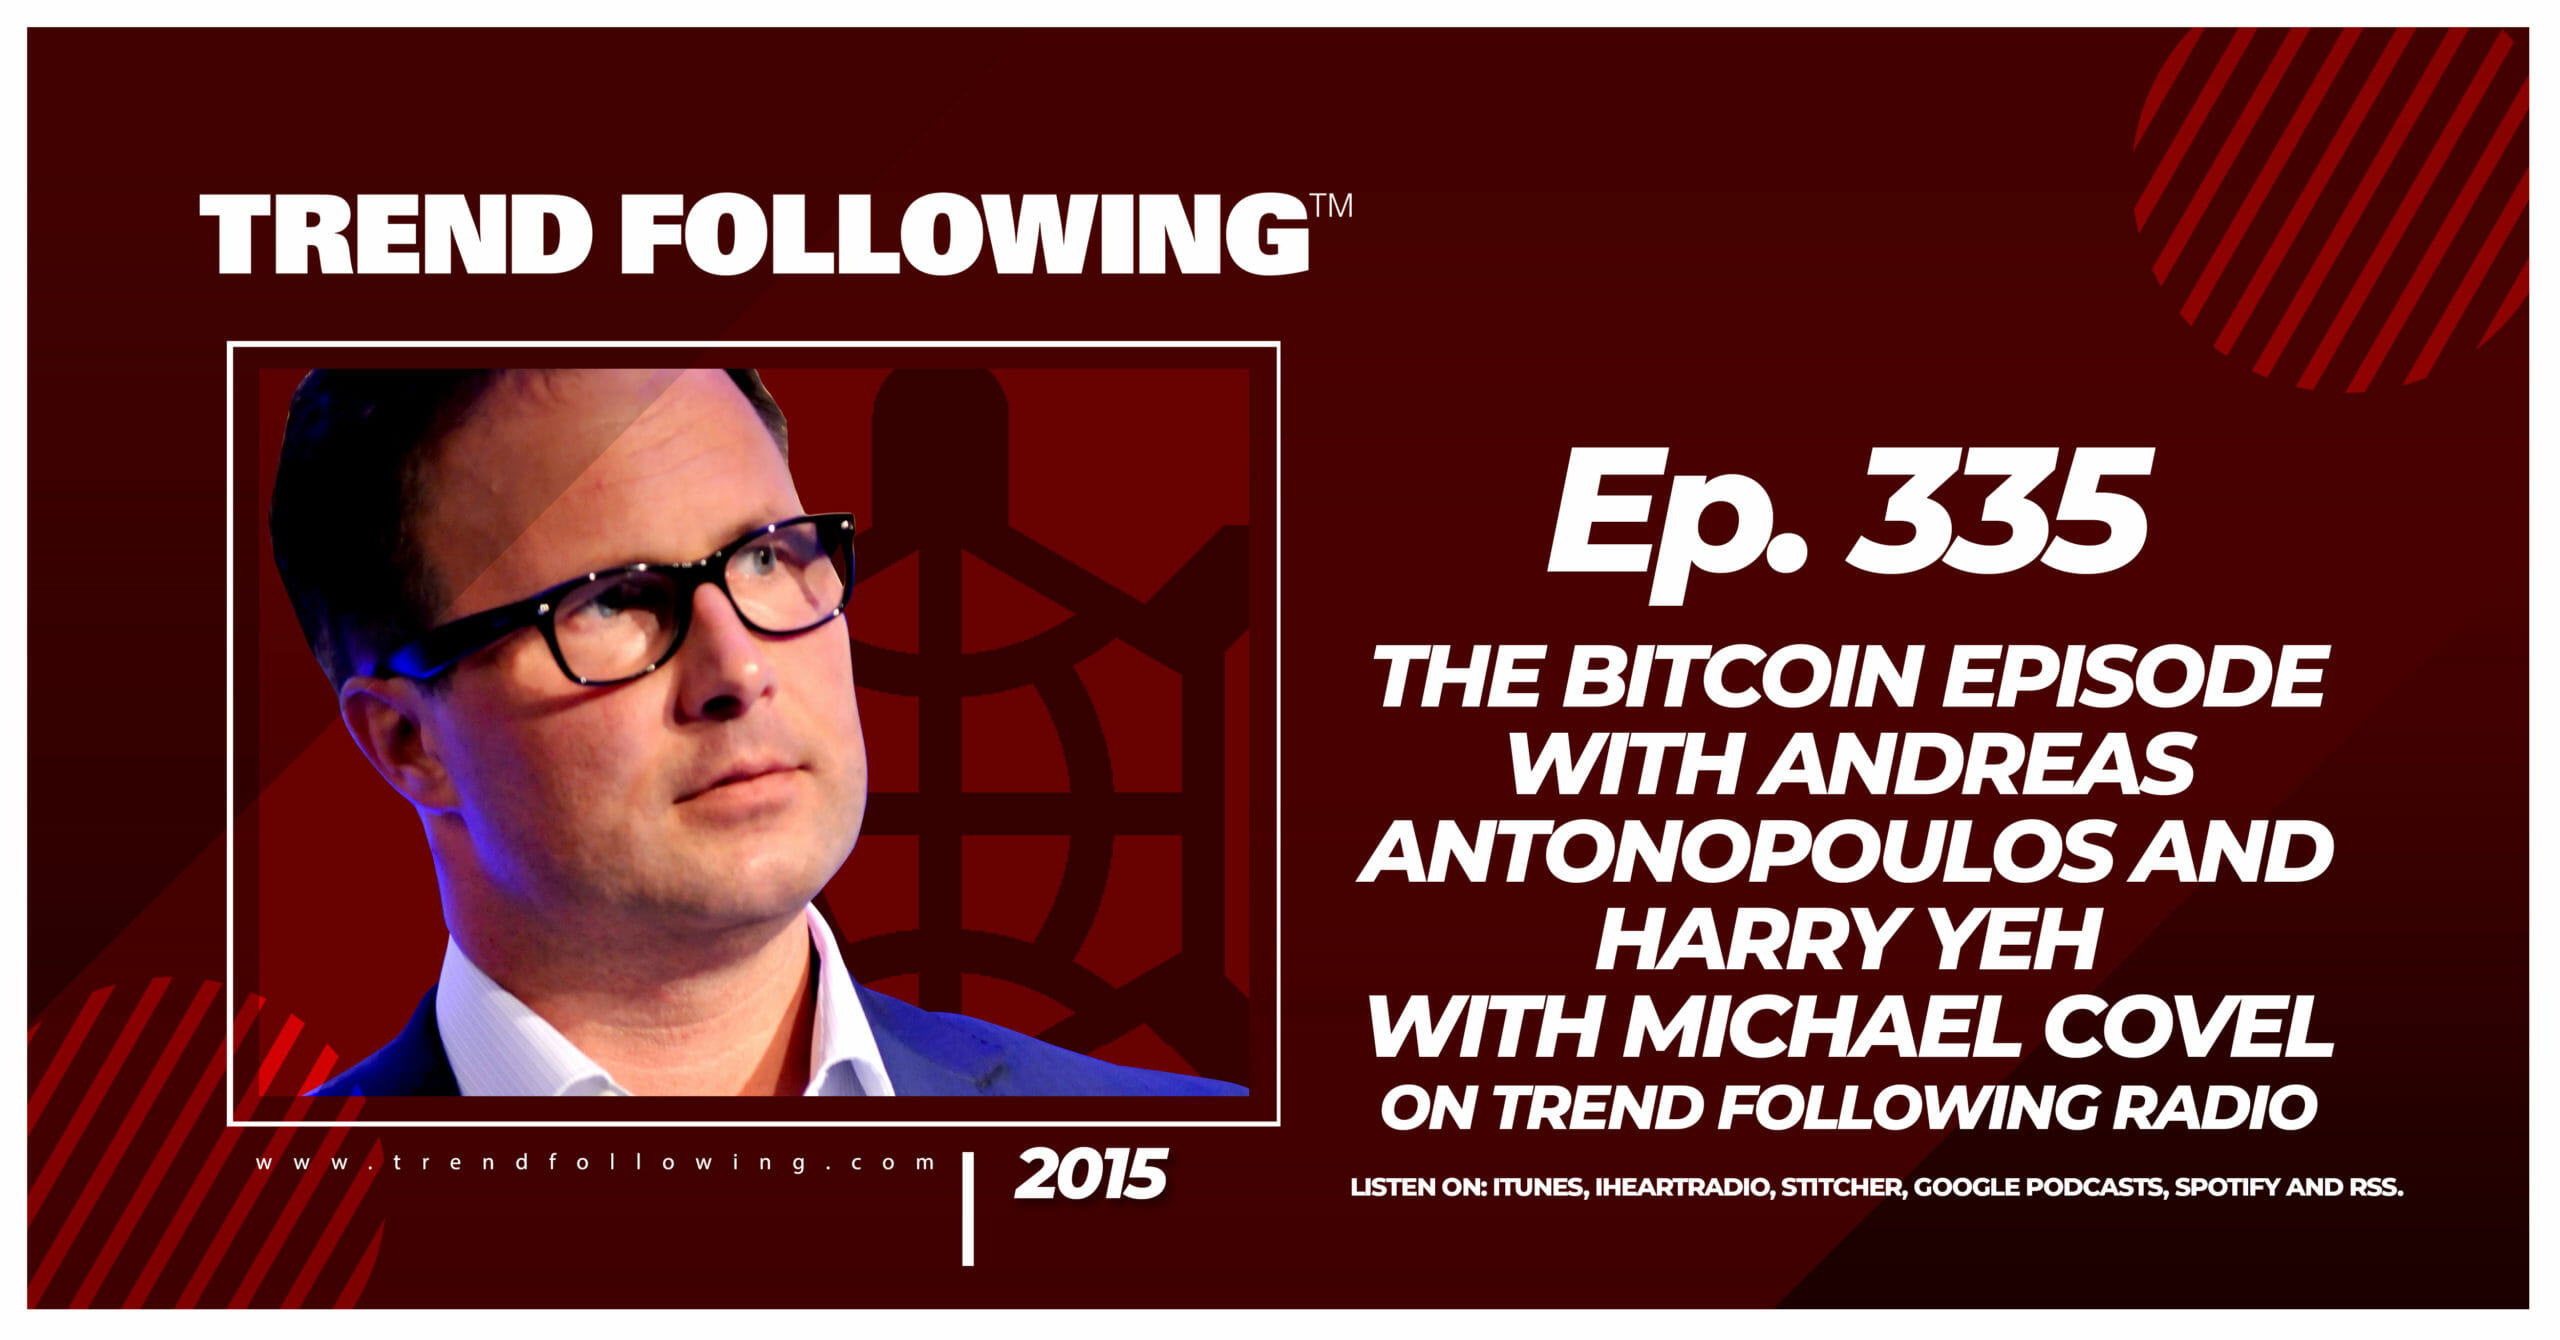 The Bitcoin Episode with Andreas Antonopoulos and Harry Yeh with Michael Covel on Trend Following Radio